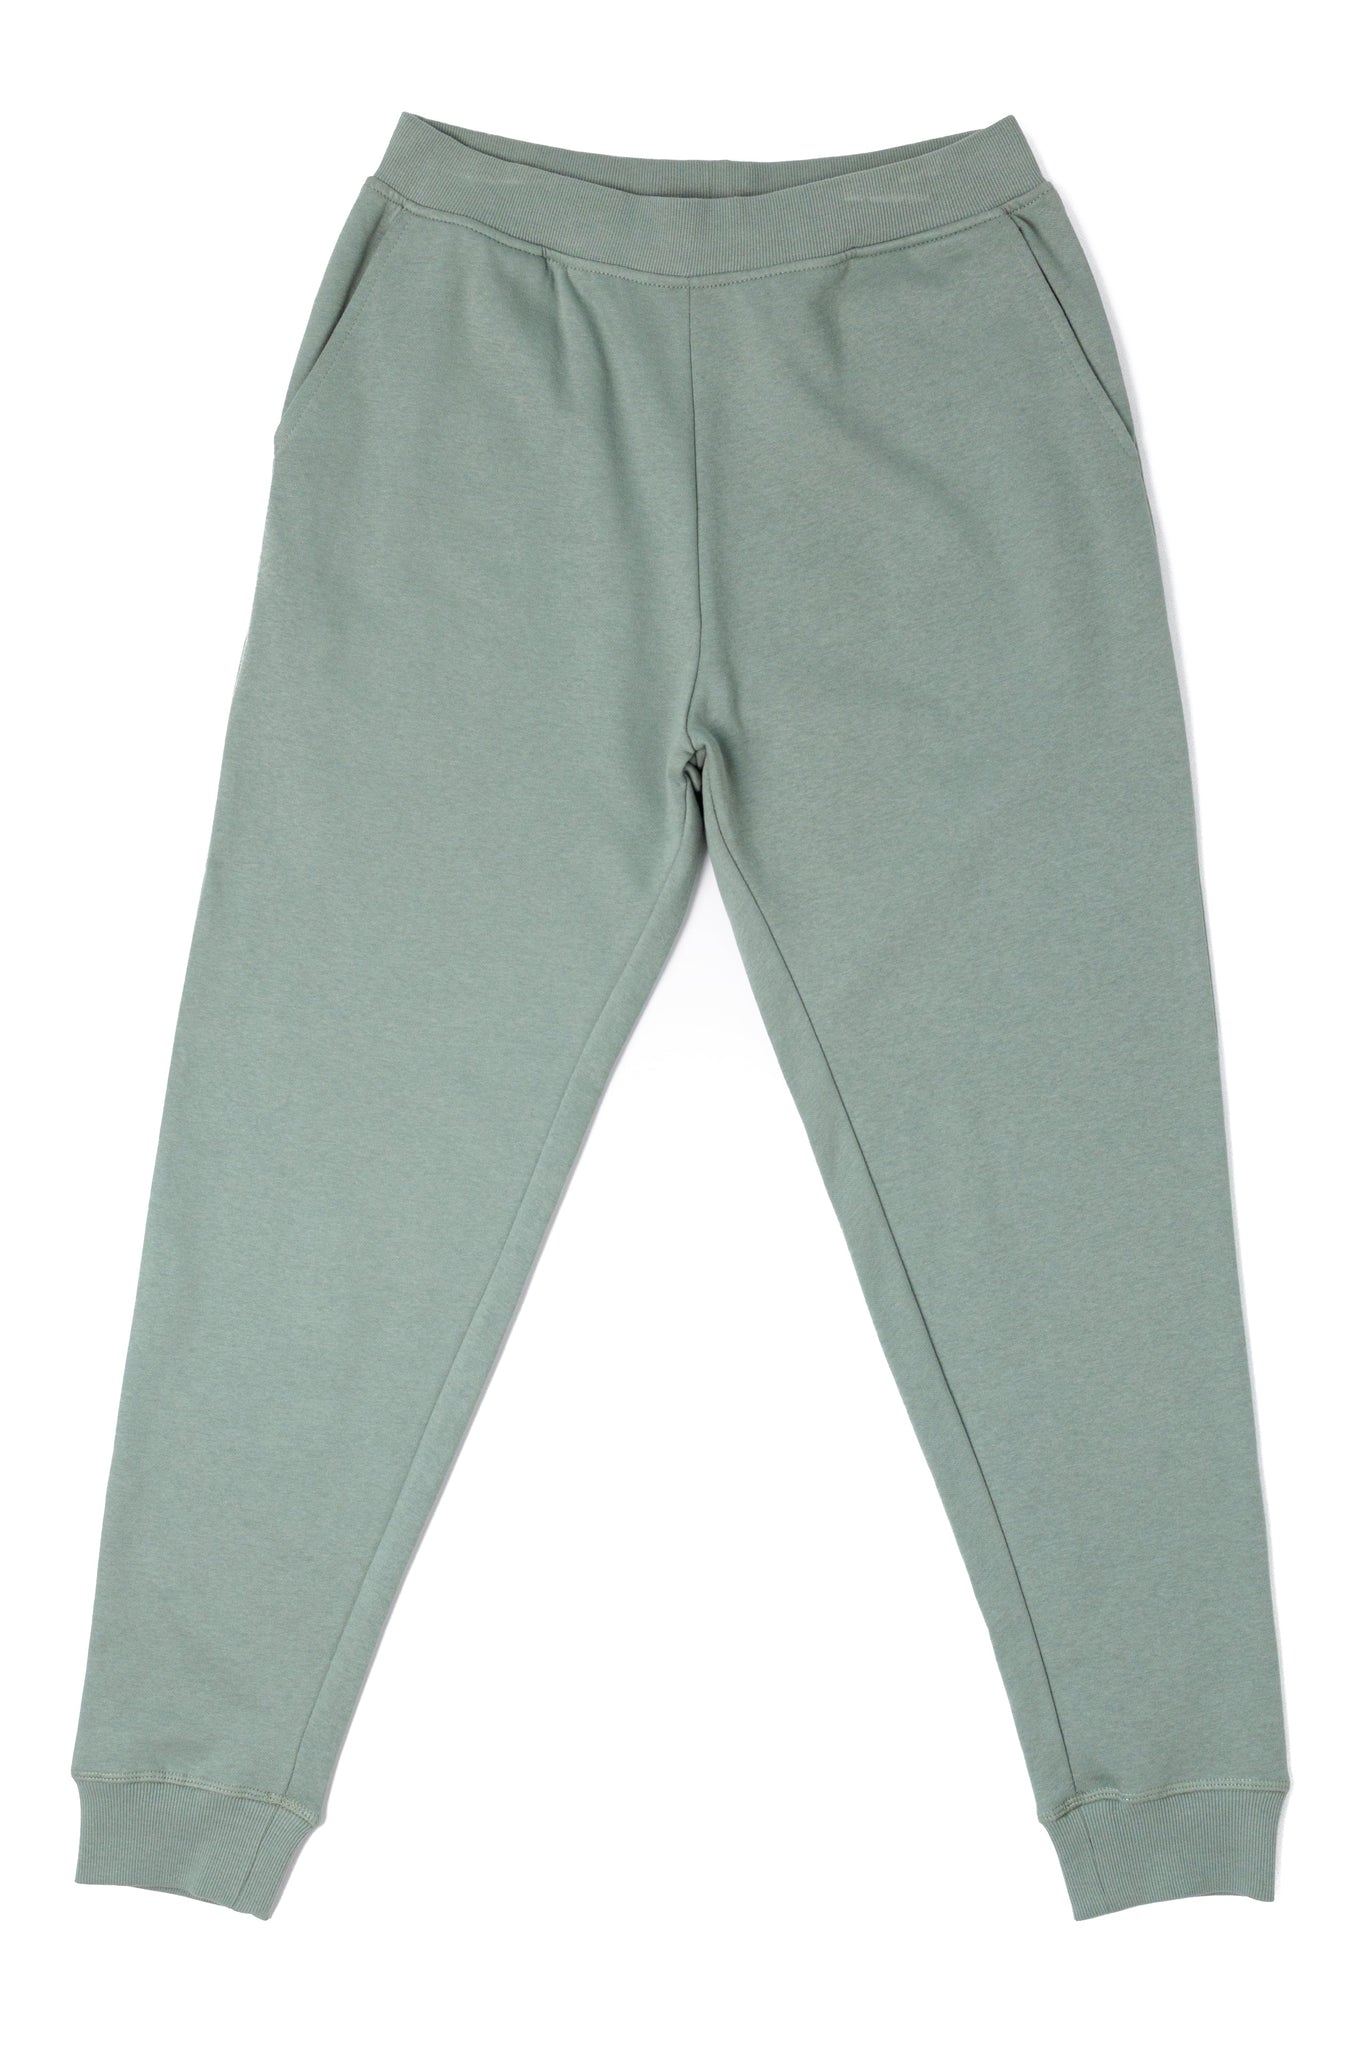 HERO - 5020R Youth Joggers - Dusty Green (Relaxed Fit) XL